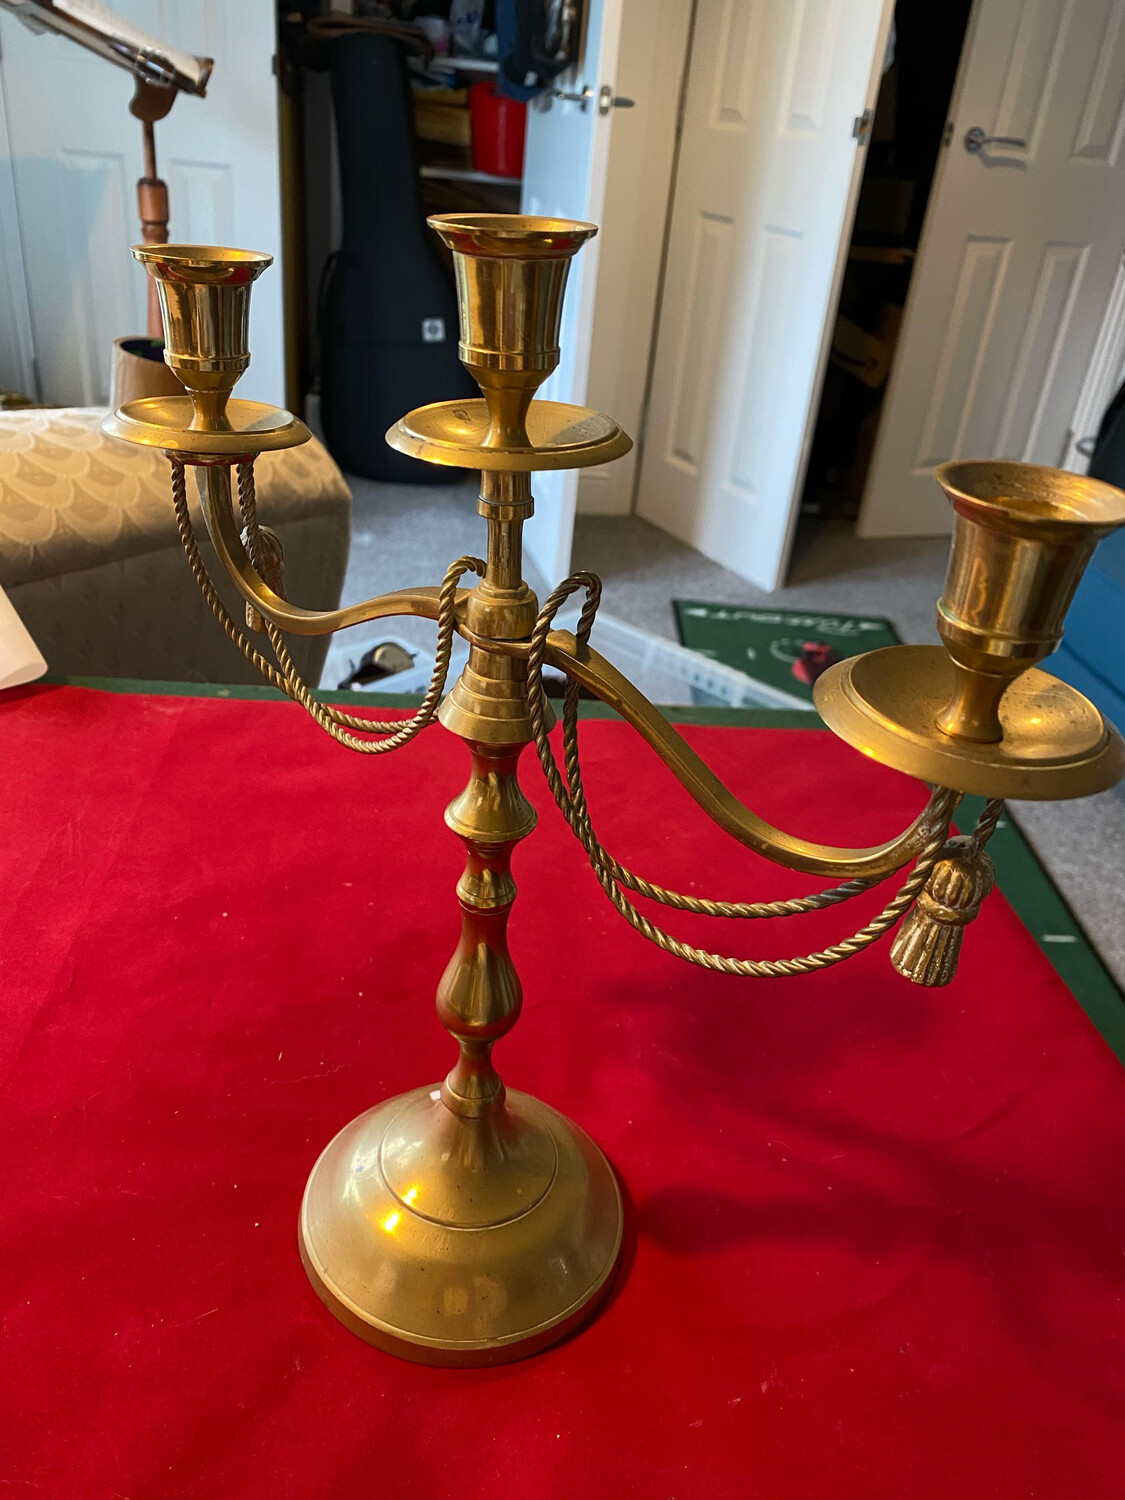 Brass Candlestick with rope swags- modern manufacture circa 1980's